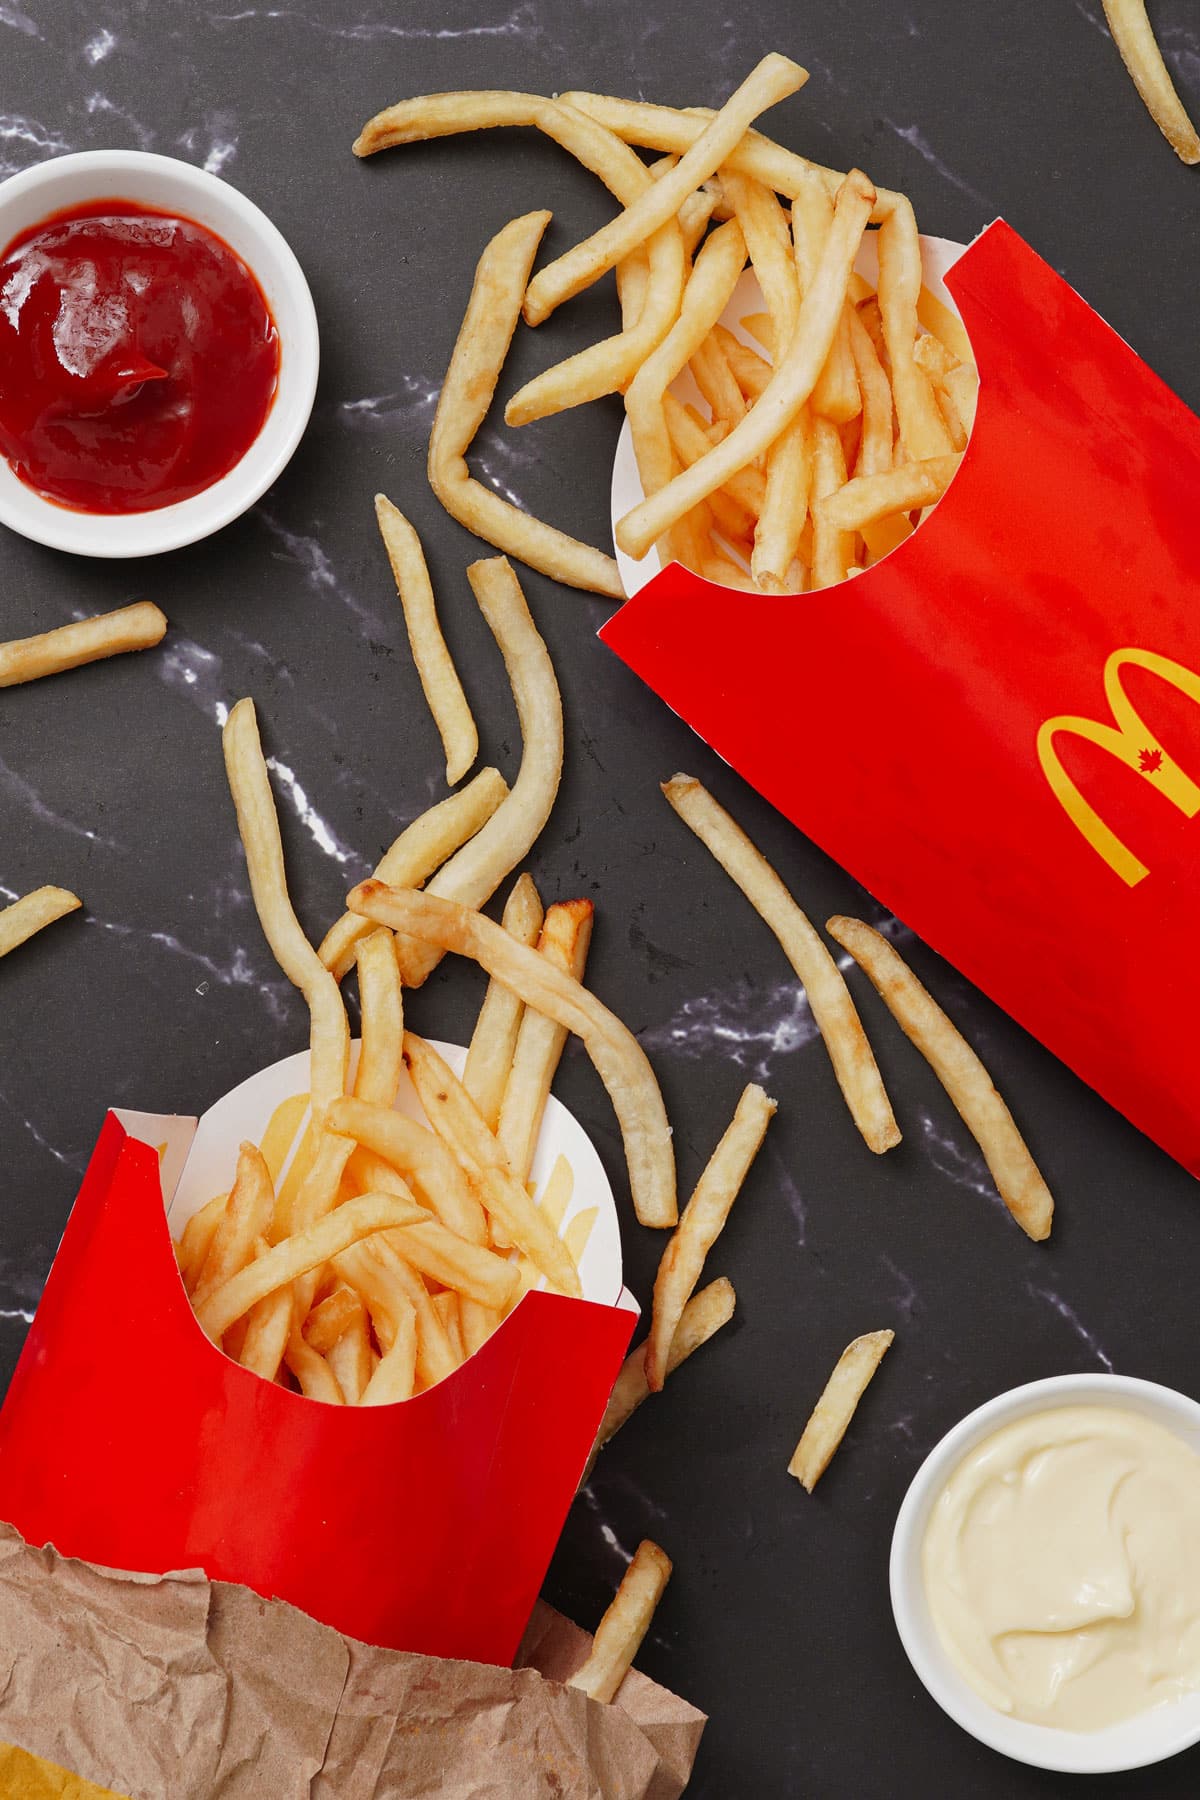 Leftover Mcdonald's French fries